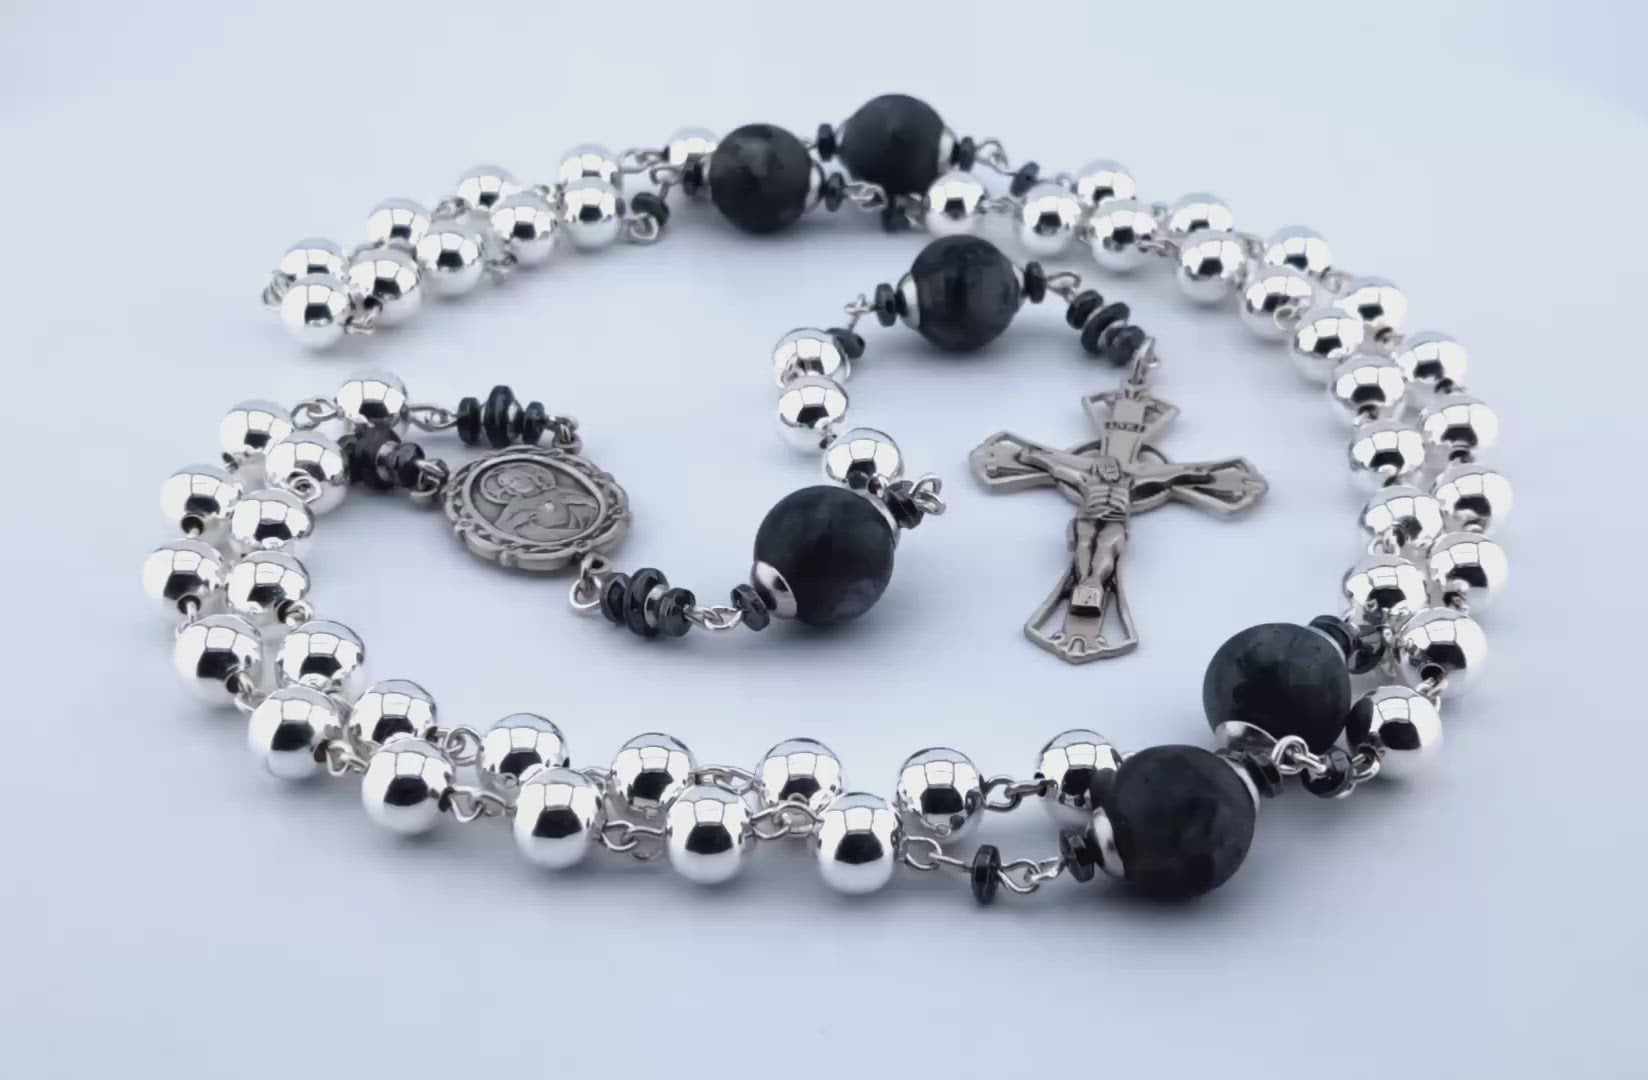 Sacred Heart of Jesus unique rosary beads with genuine 925 silver beads, wire, centre medal and crucifix.